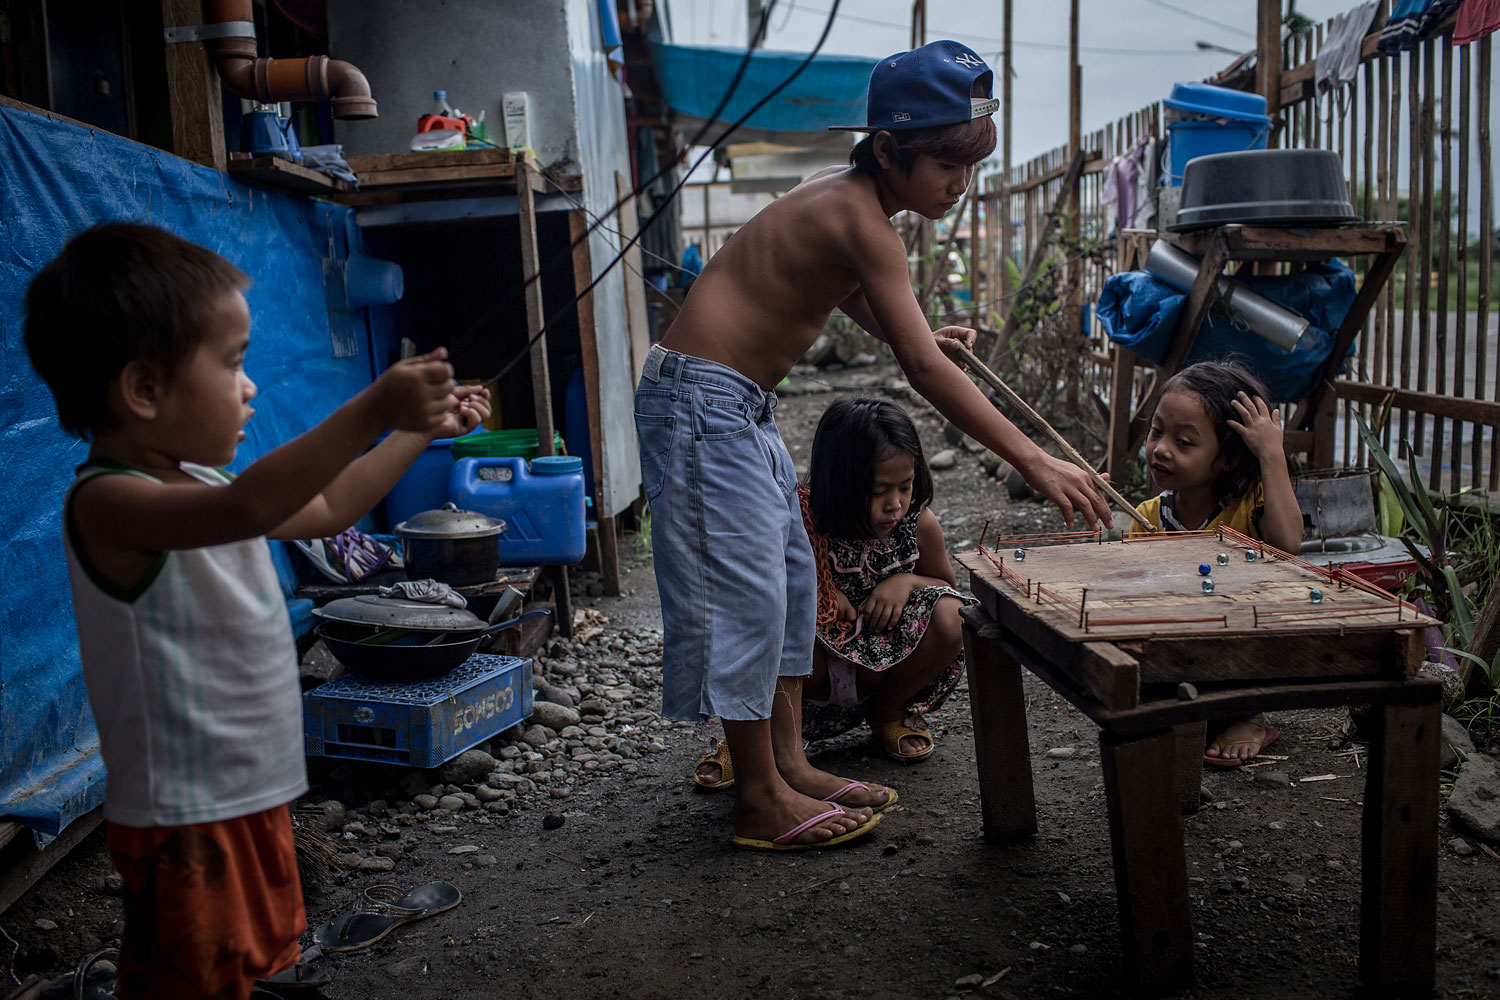 Kids watch on as a boy plays pool with marbles on a makeshift pool table in a temporary bunk house complex on April 16, 2014 in Tacloban.